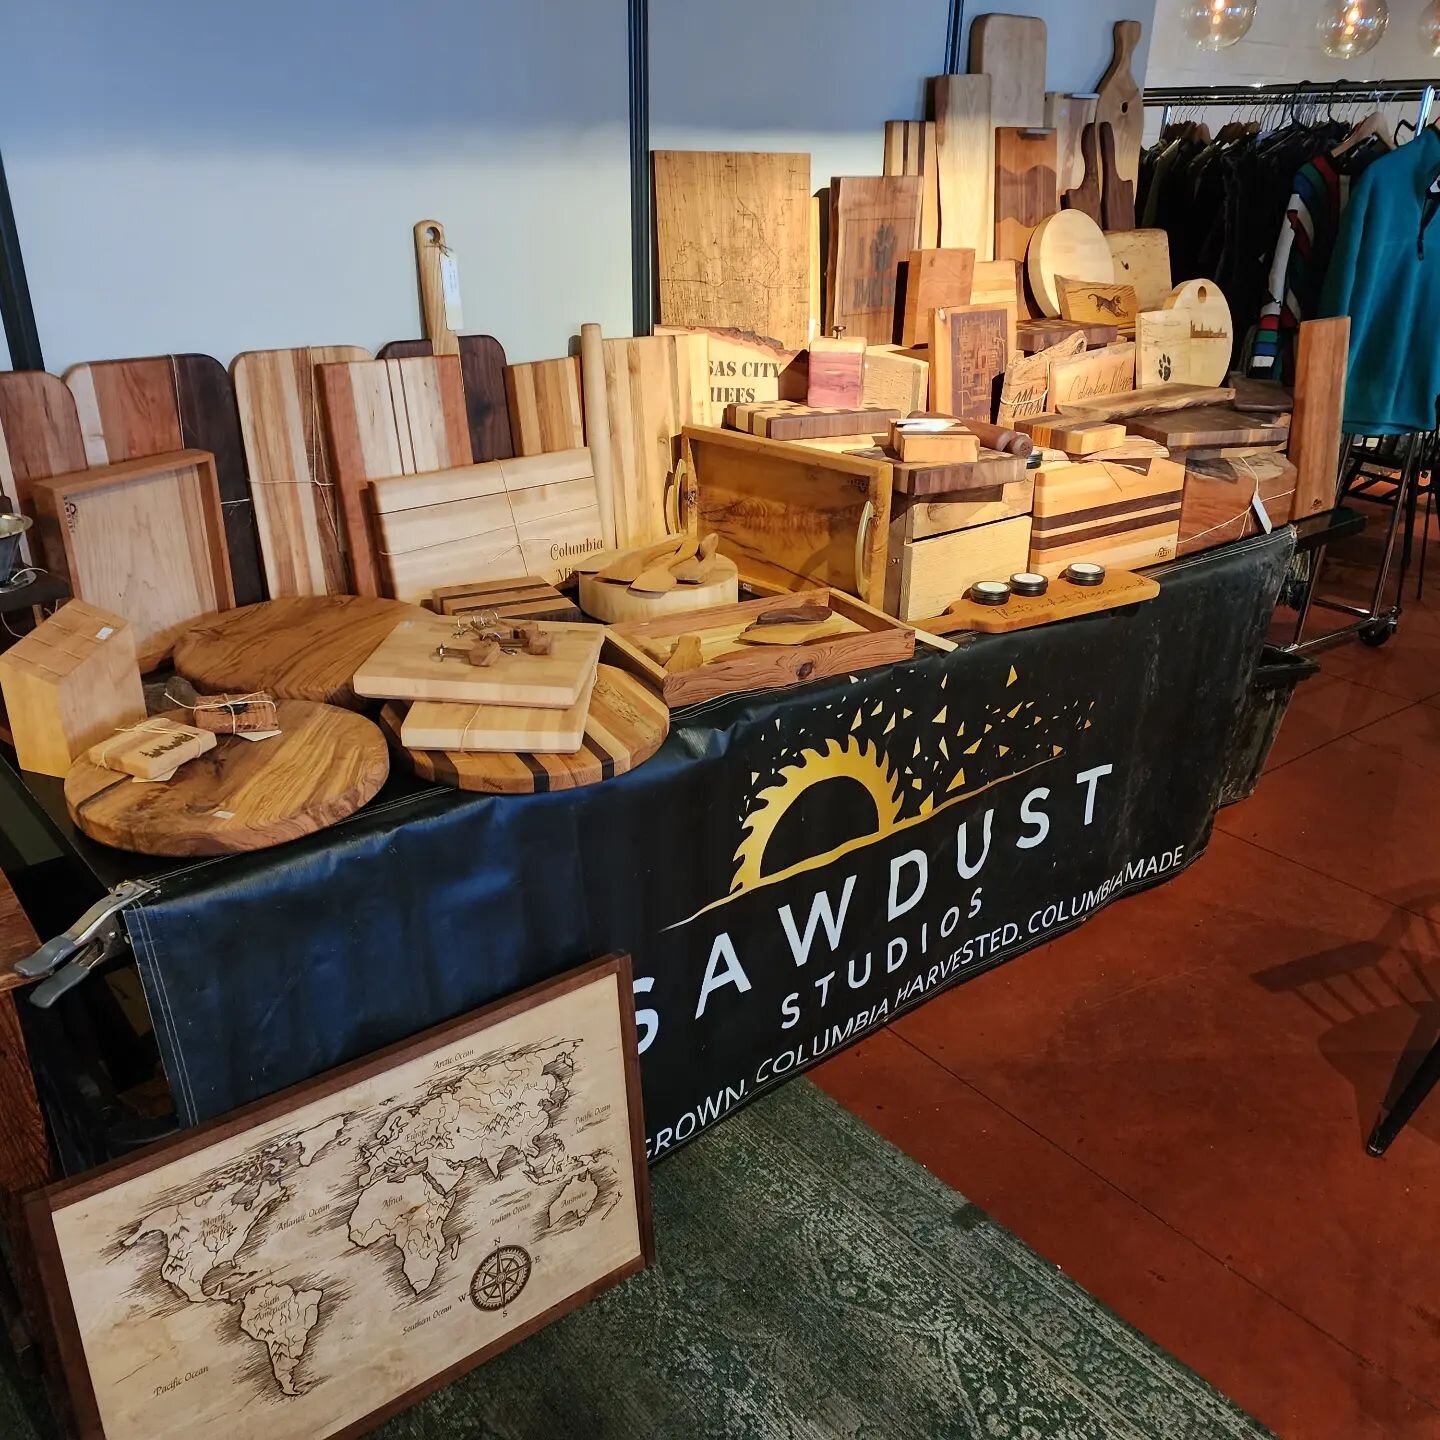 We're at Cherry Street Cellar today from 11-4 for their Holiday Makers Market. Come say hi and check out their beautiful space and all the other makers.

#sawduststudios #columbiamo #supportlocalbusiness #shopcomo #handmadegifts